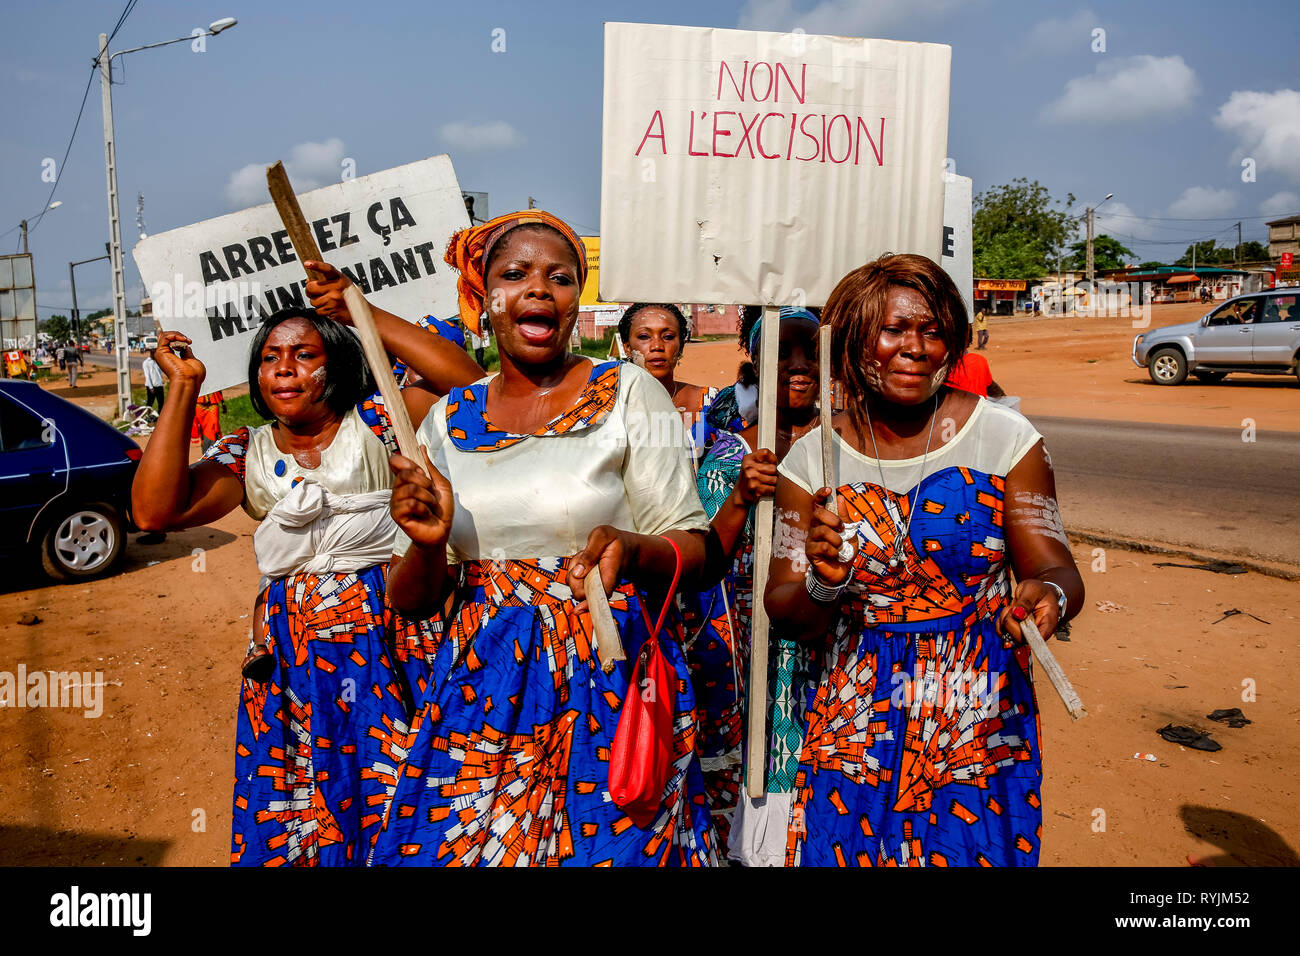 Women demonstrating in Dabou, Ivory Coast. Stock Photo